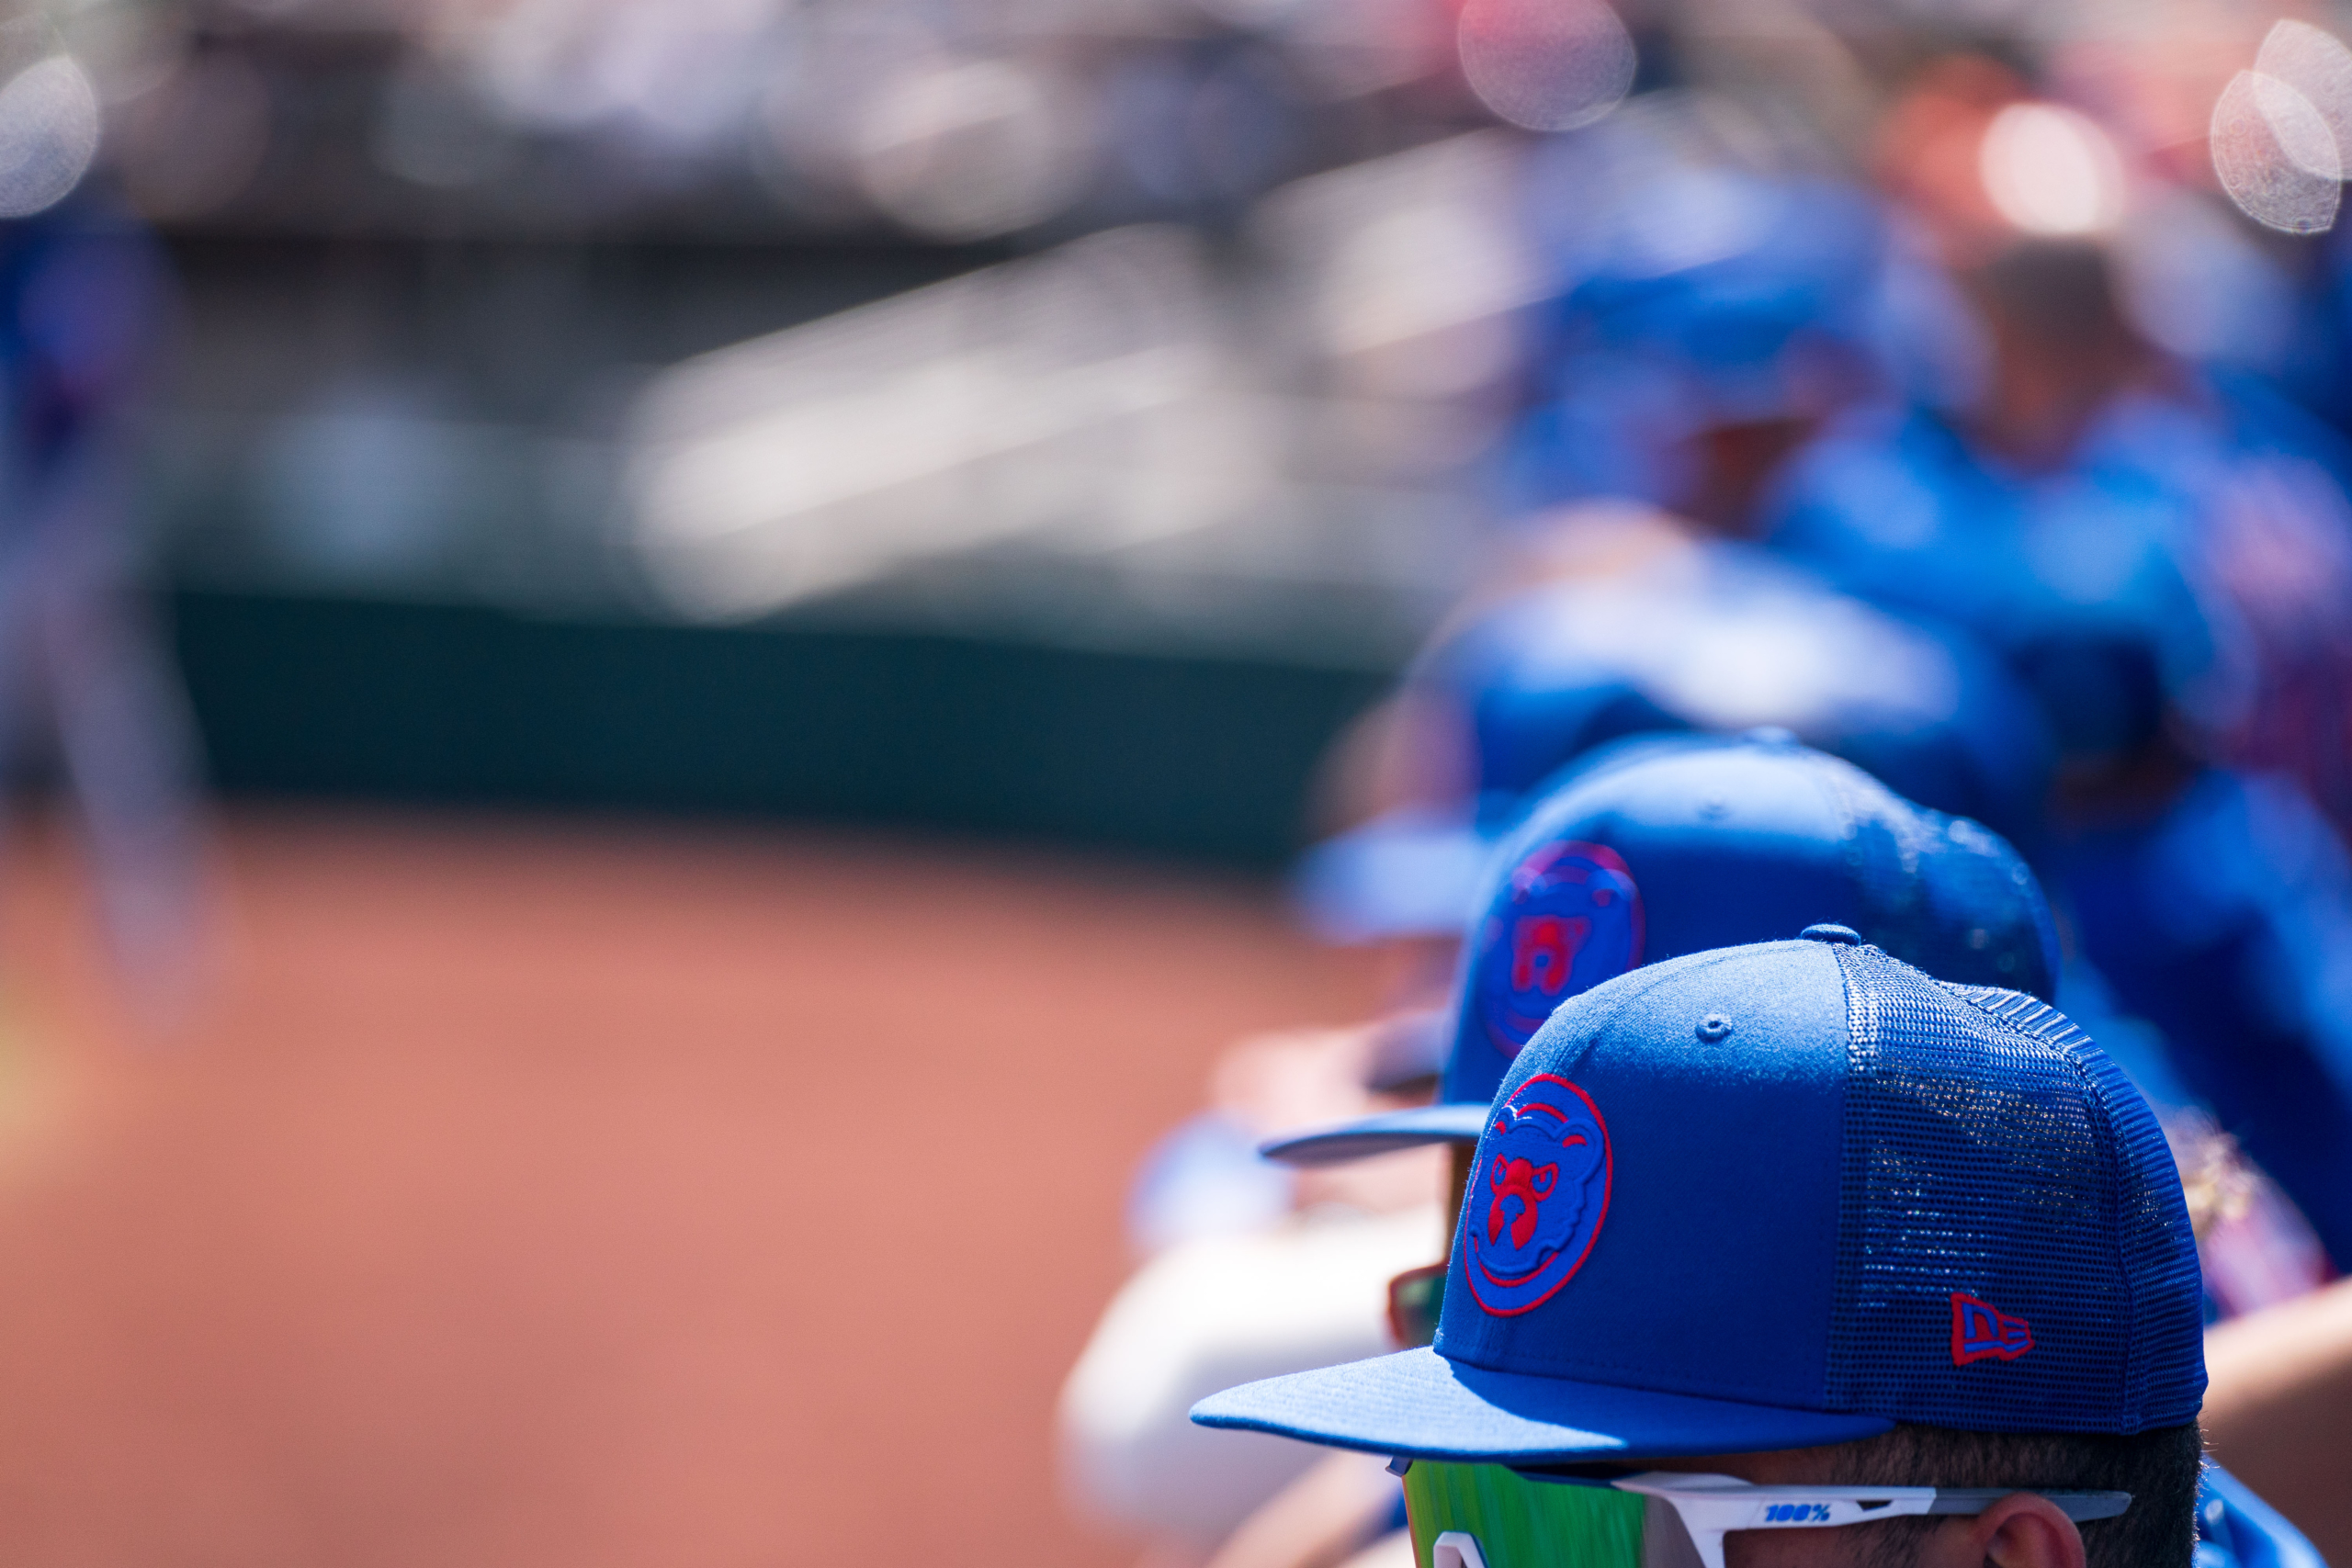 What Will The Chicago Cubs Do At The Trade Deadline?